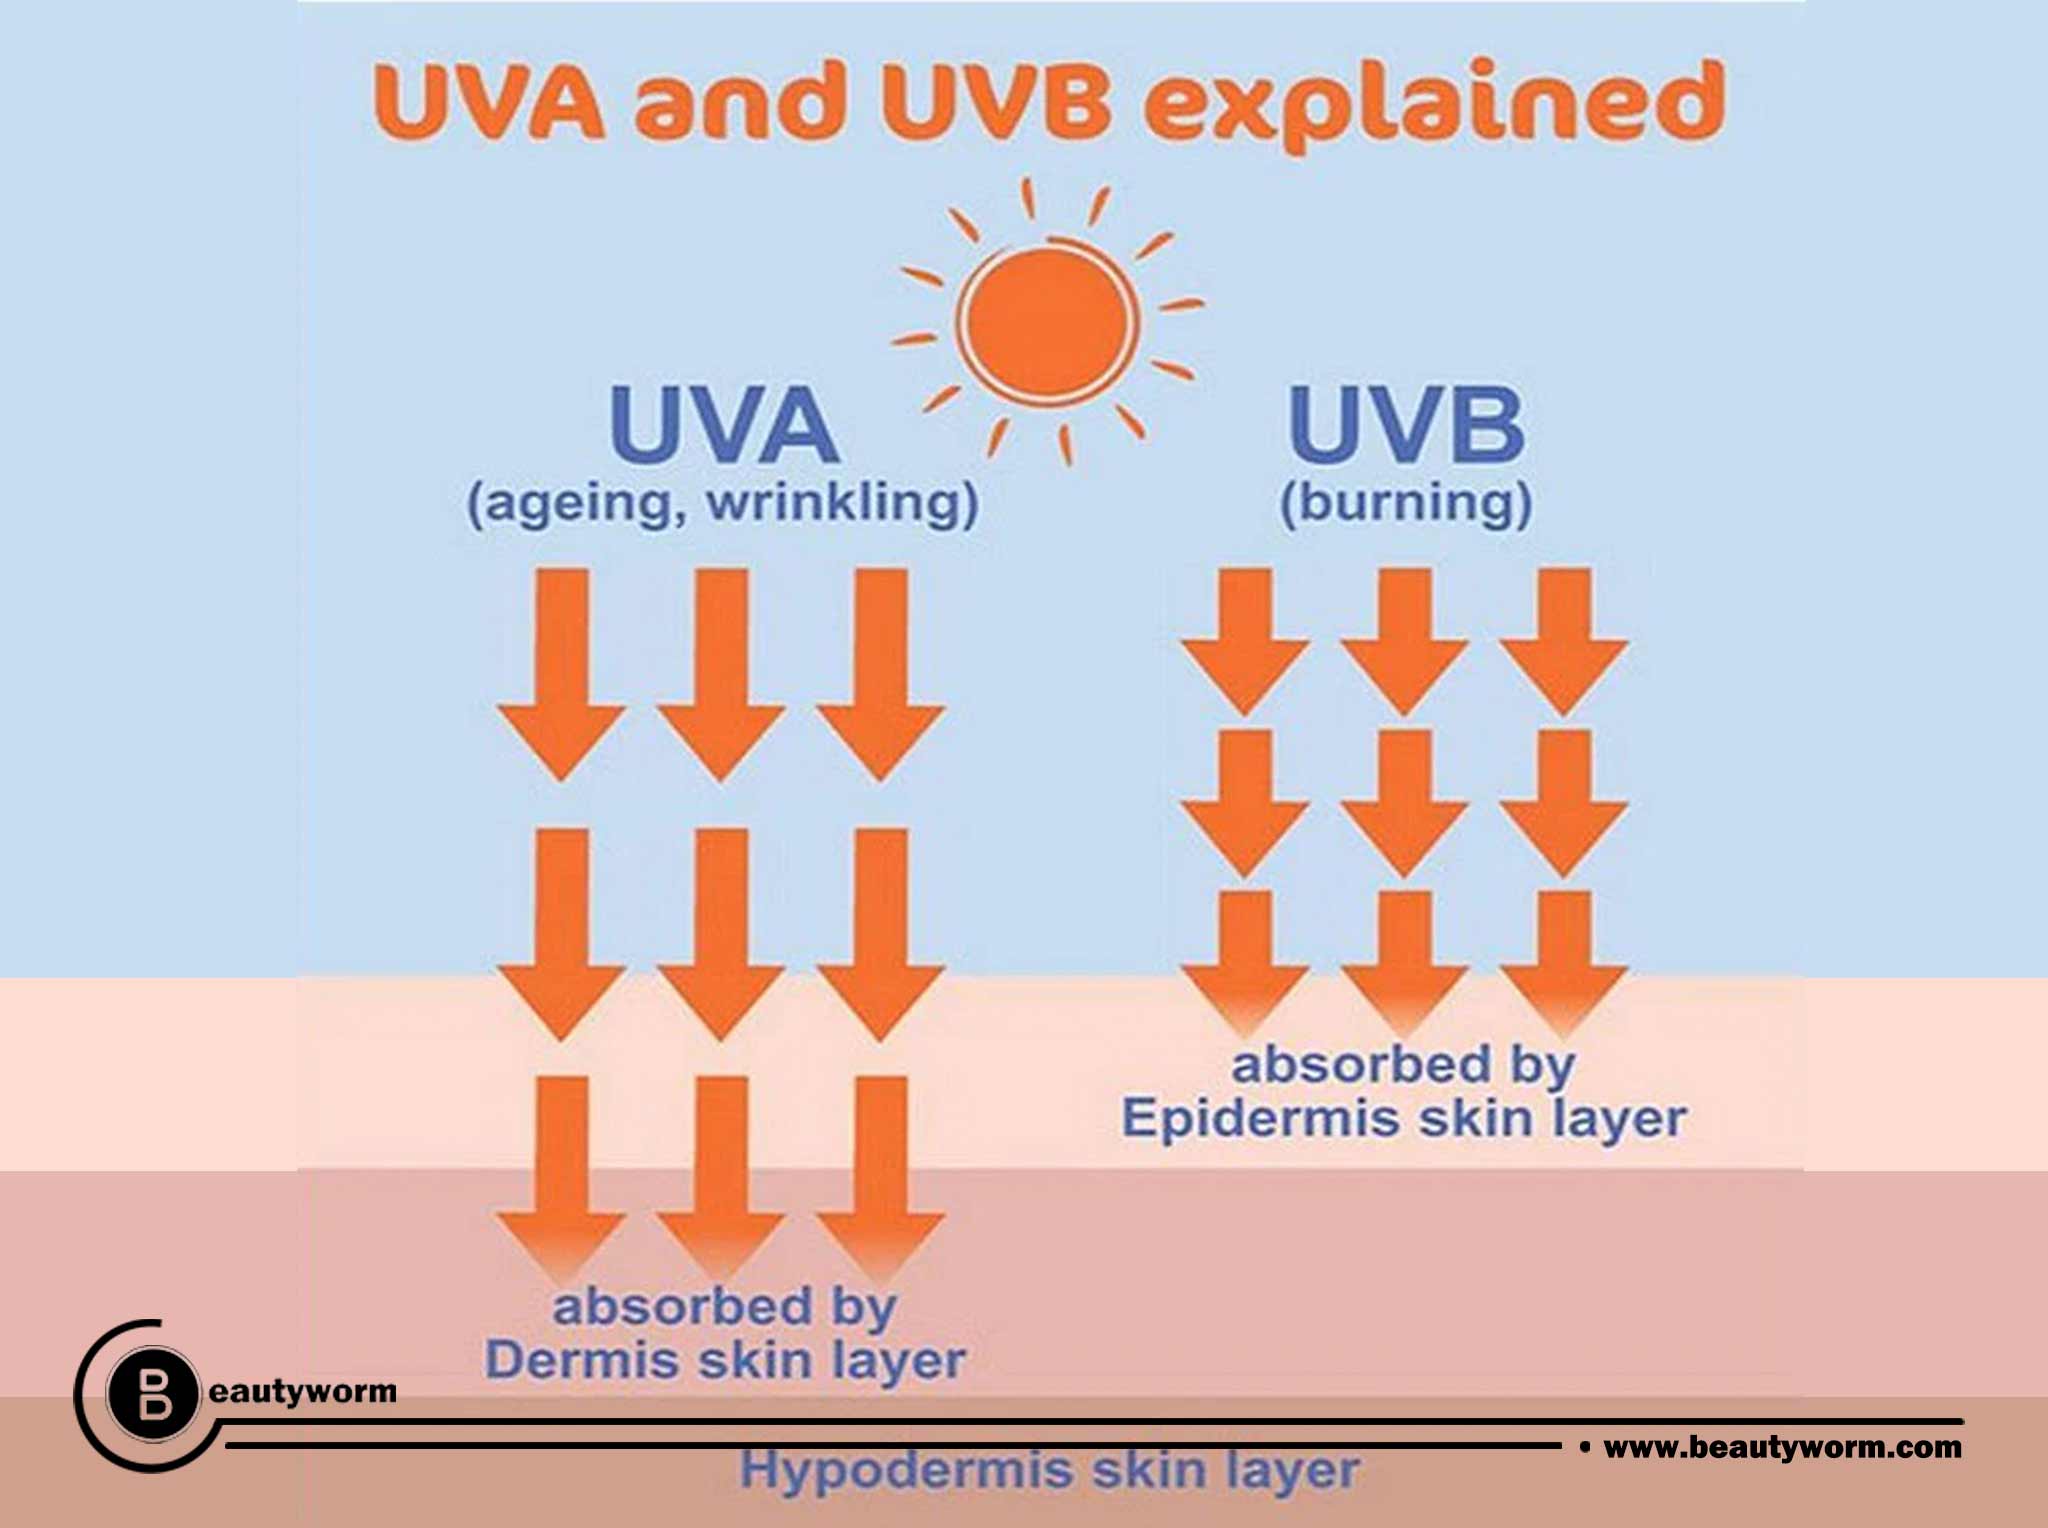 How does sunscreen work?